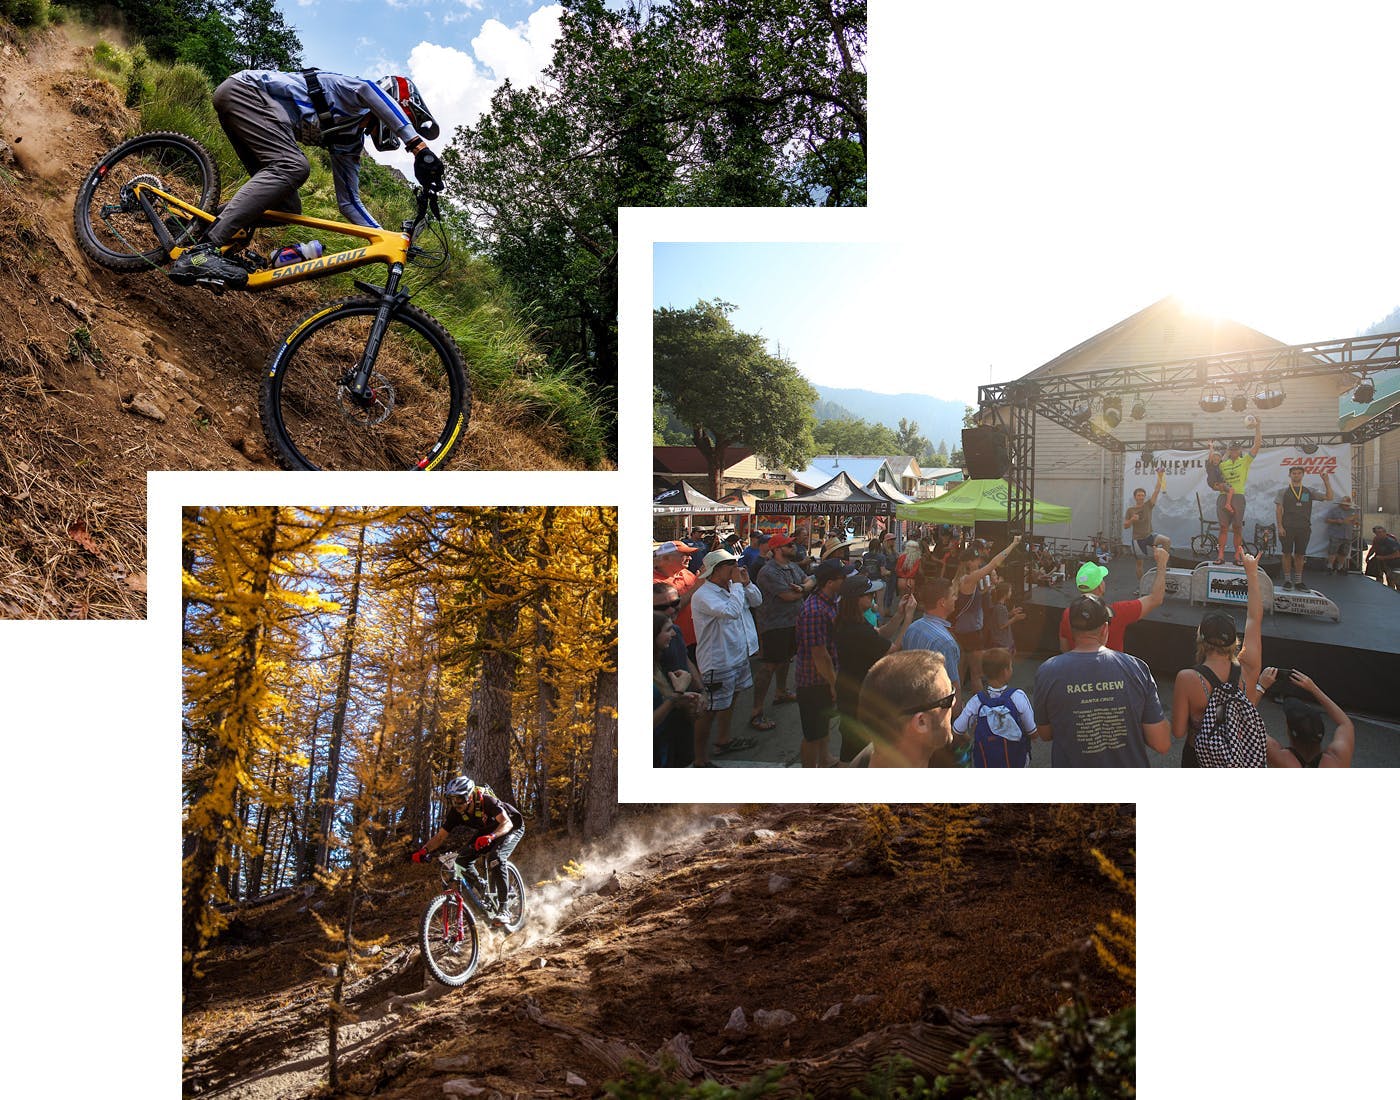 A collage of 3 images focused on Santa Cruz Bicycles racing and events